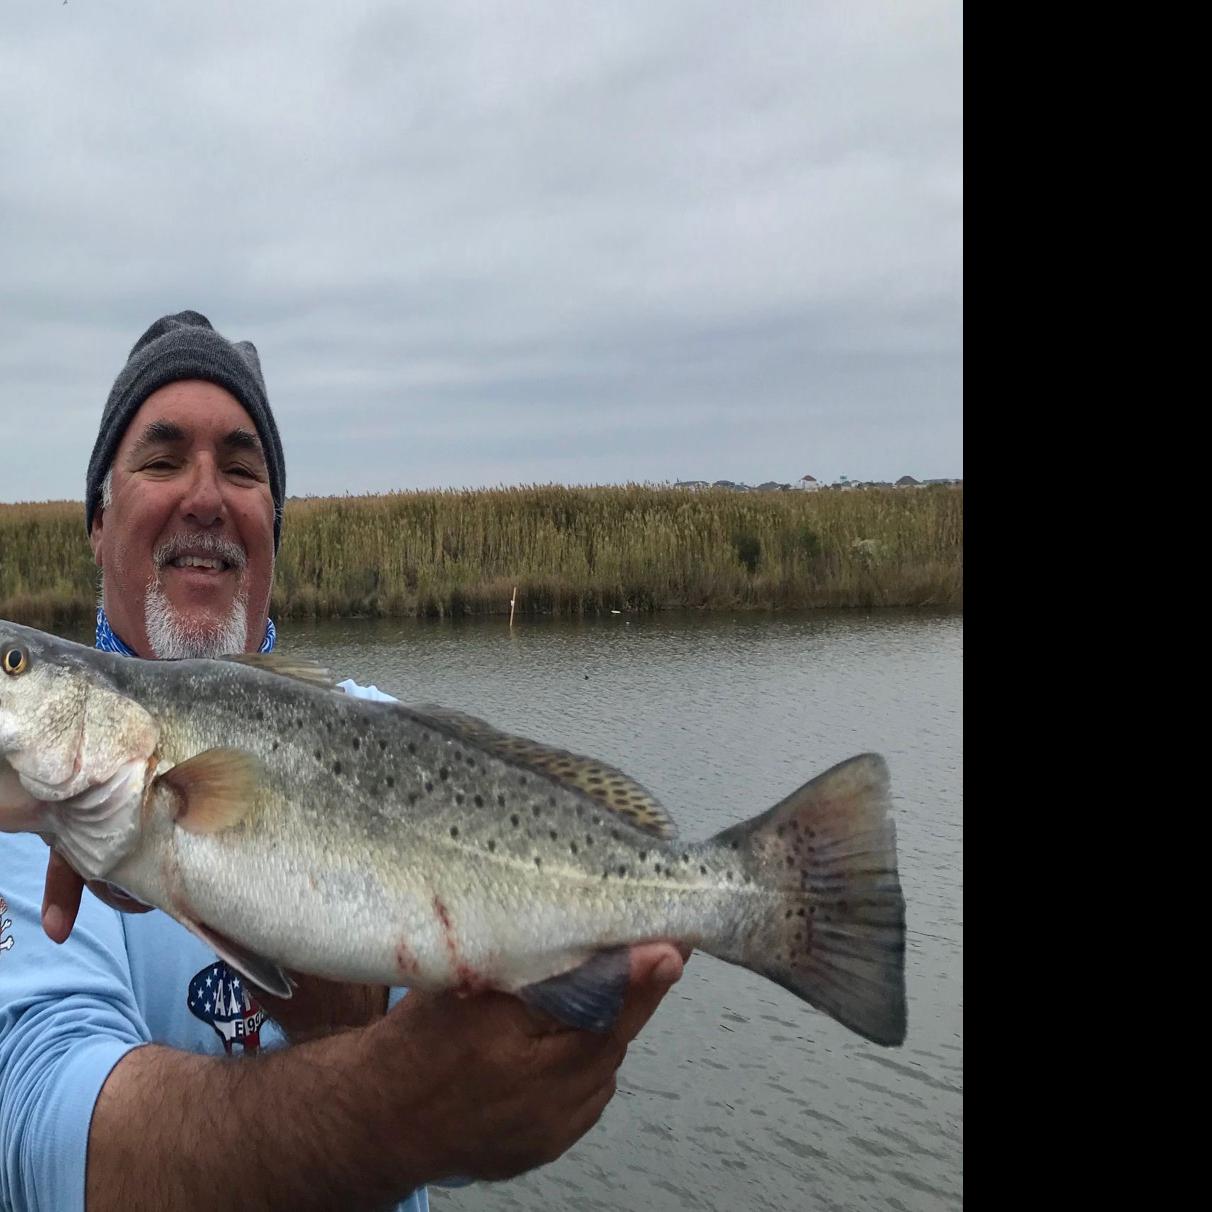 This channel is a winter wonderland for speckled trout